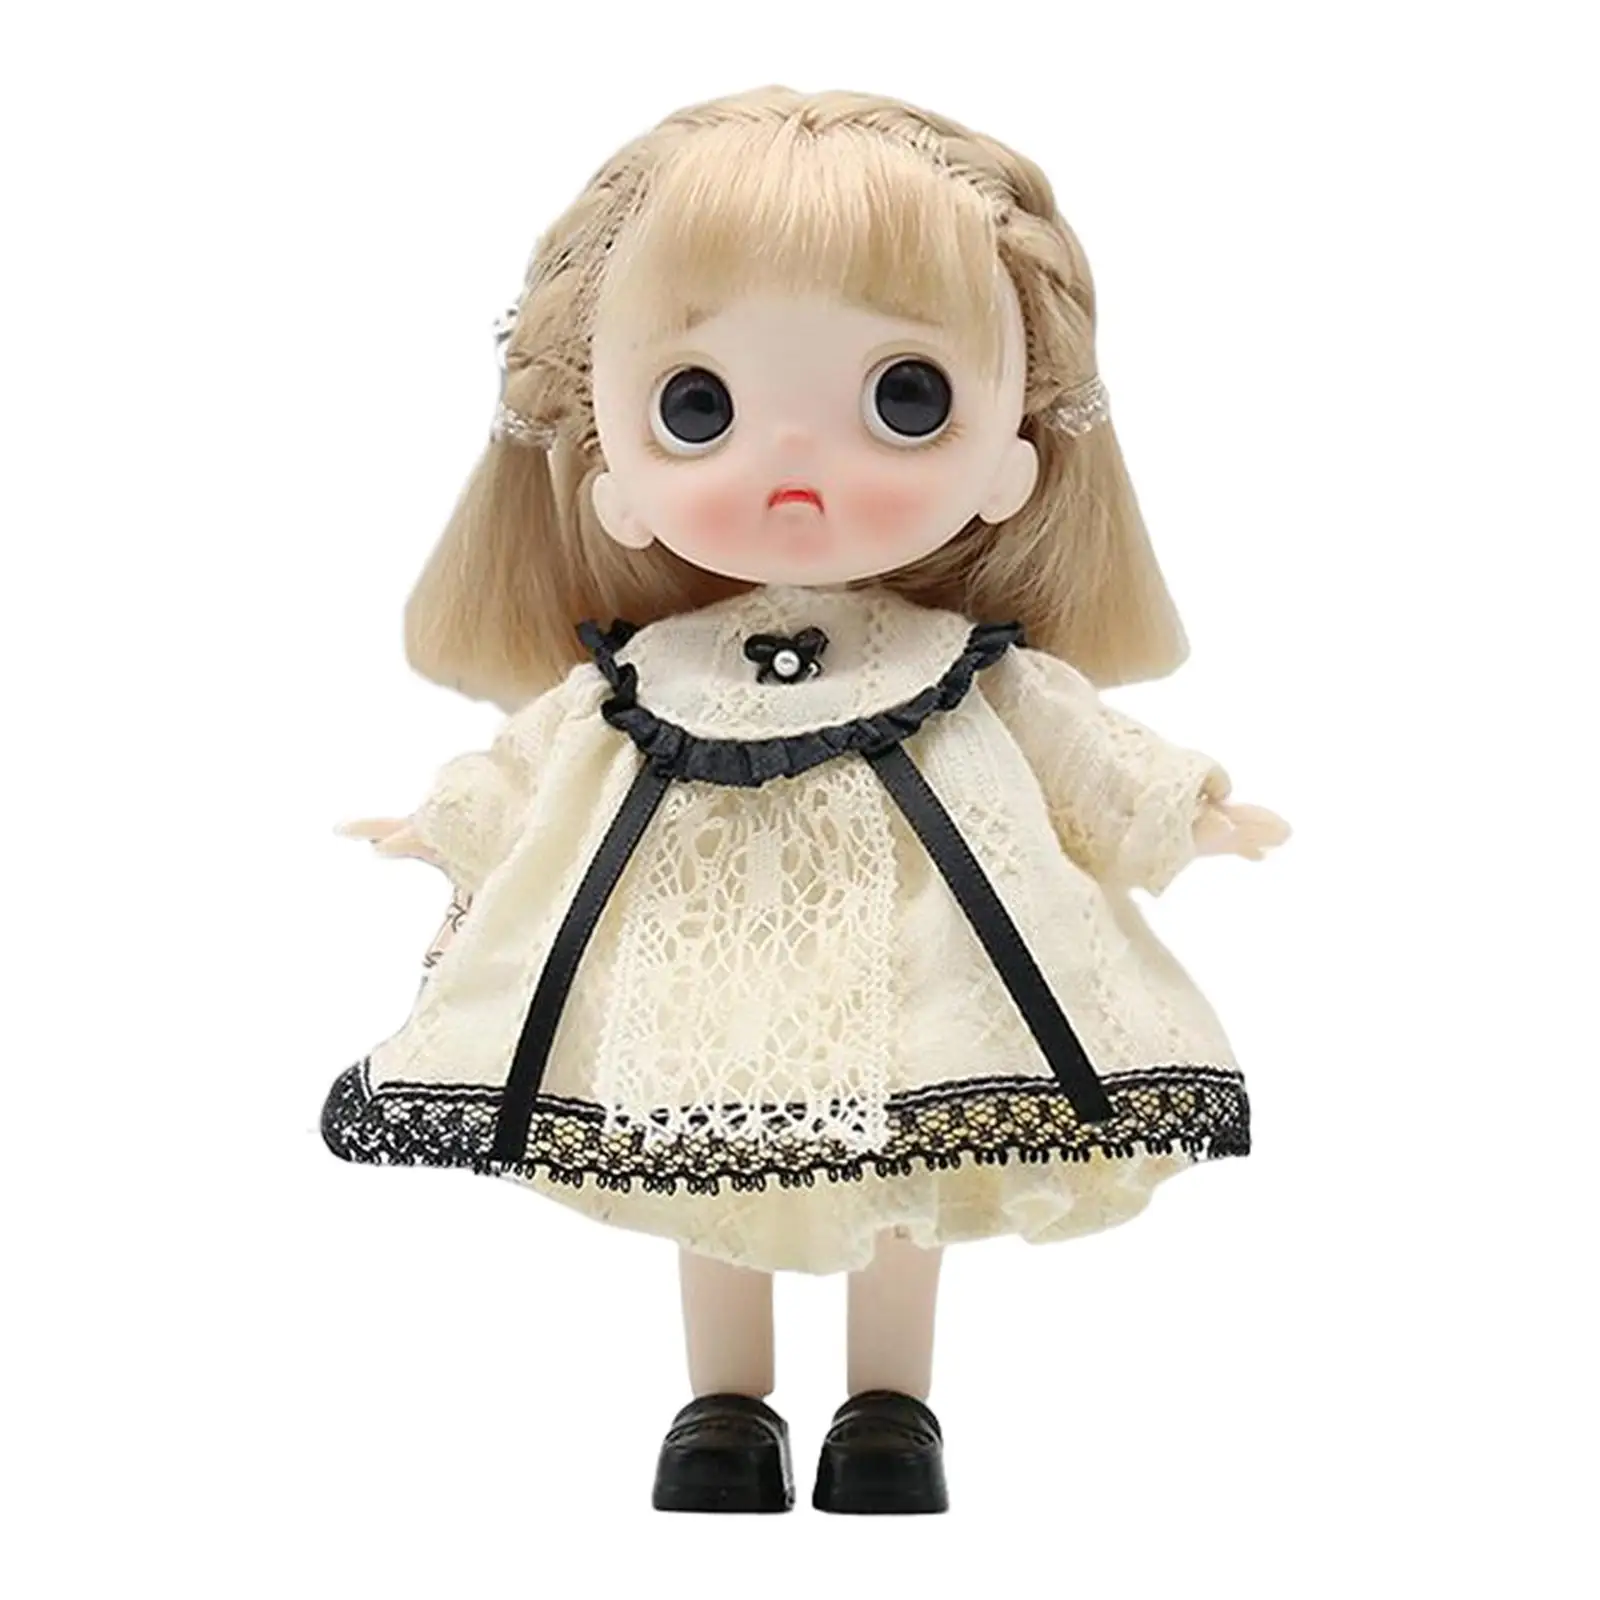 Mini Ball Jointed Baby Doll Dress up Accessories Bendable 14cm Kids Girls Toys makeup Doll for Birthday Graduation Gifts